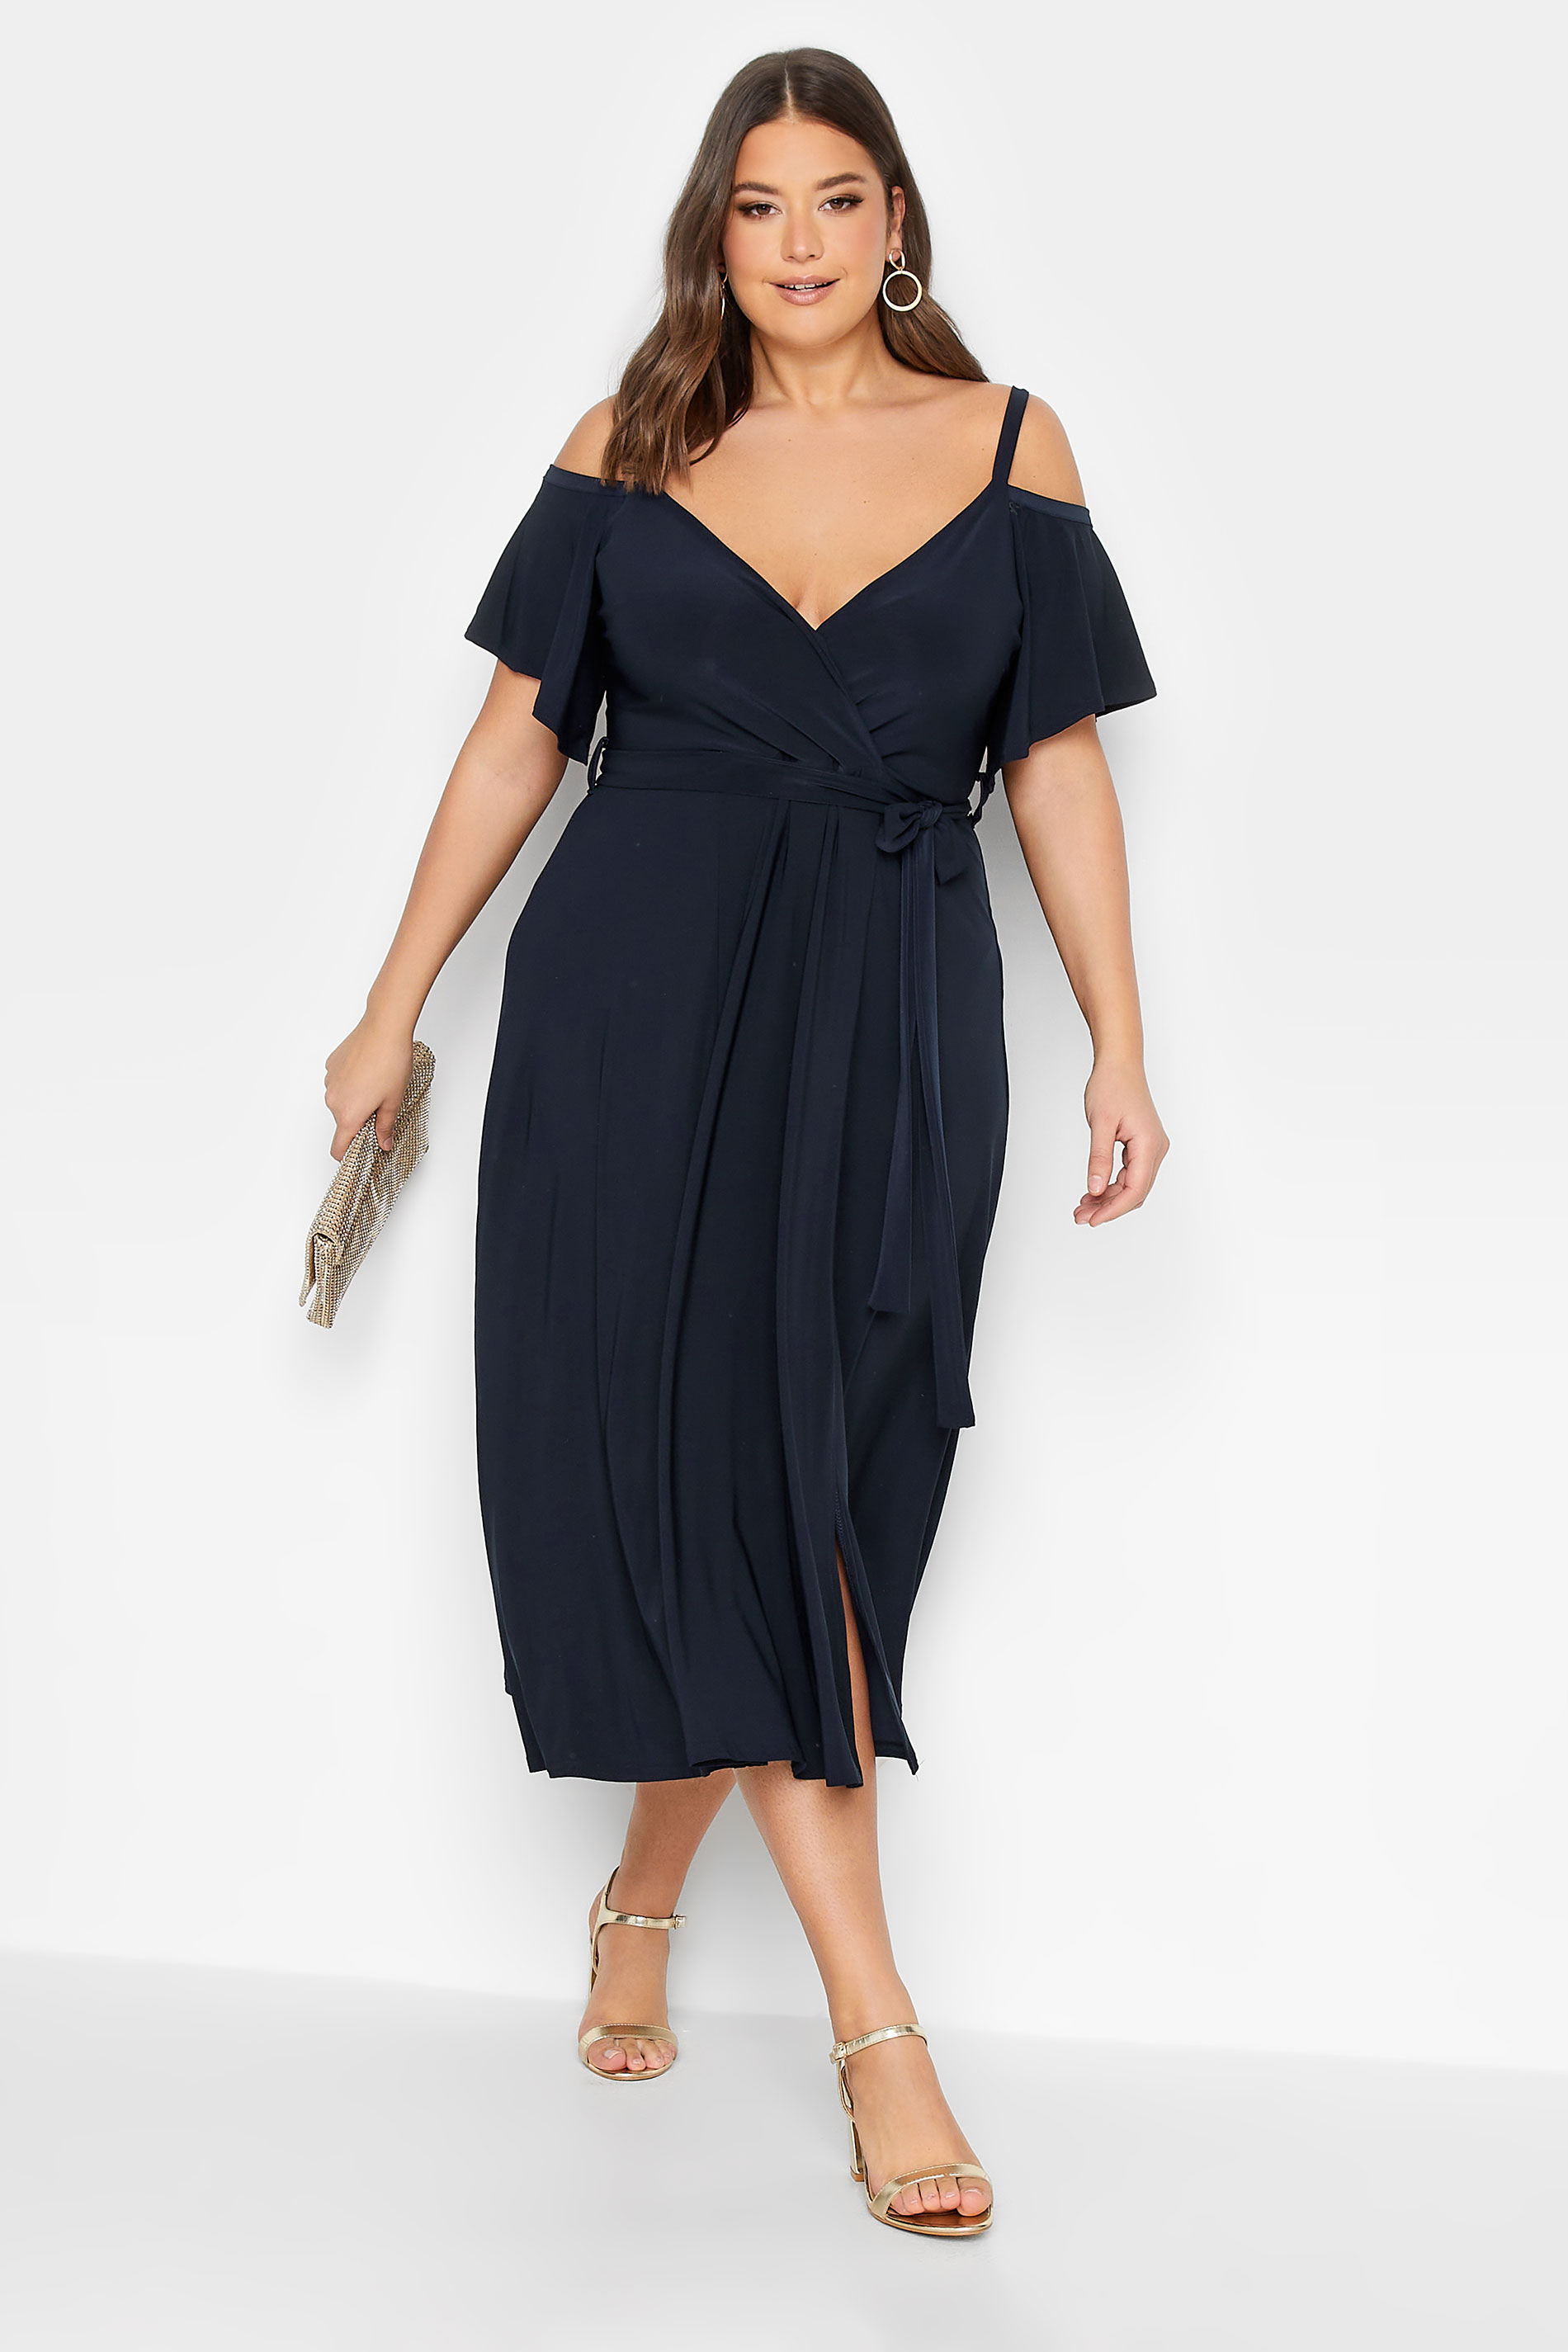 YOURS LONDON Plus Size Navy Blue Cold Shoulder Wrap Dress | Yours Clothing 2